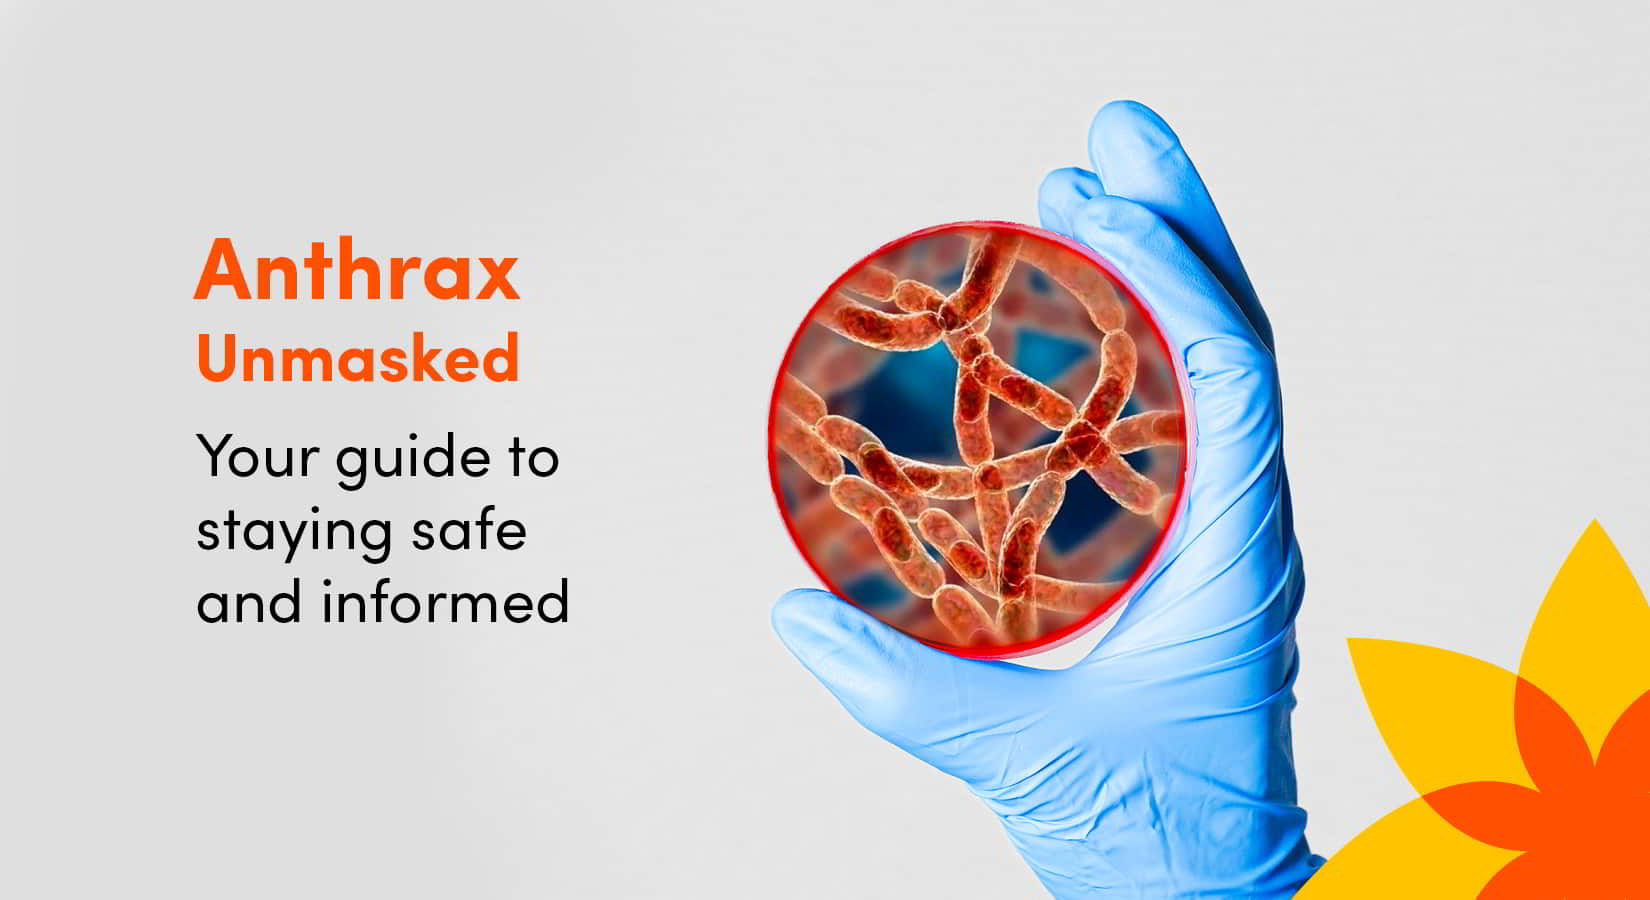 Anthrax Unmasked: Your Guide to Staying Safe and Informed